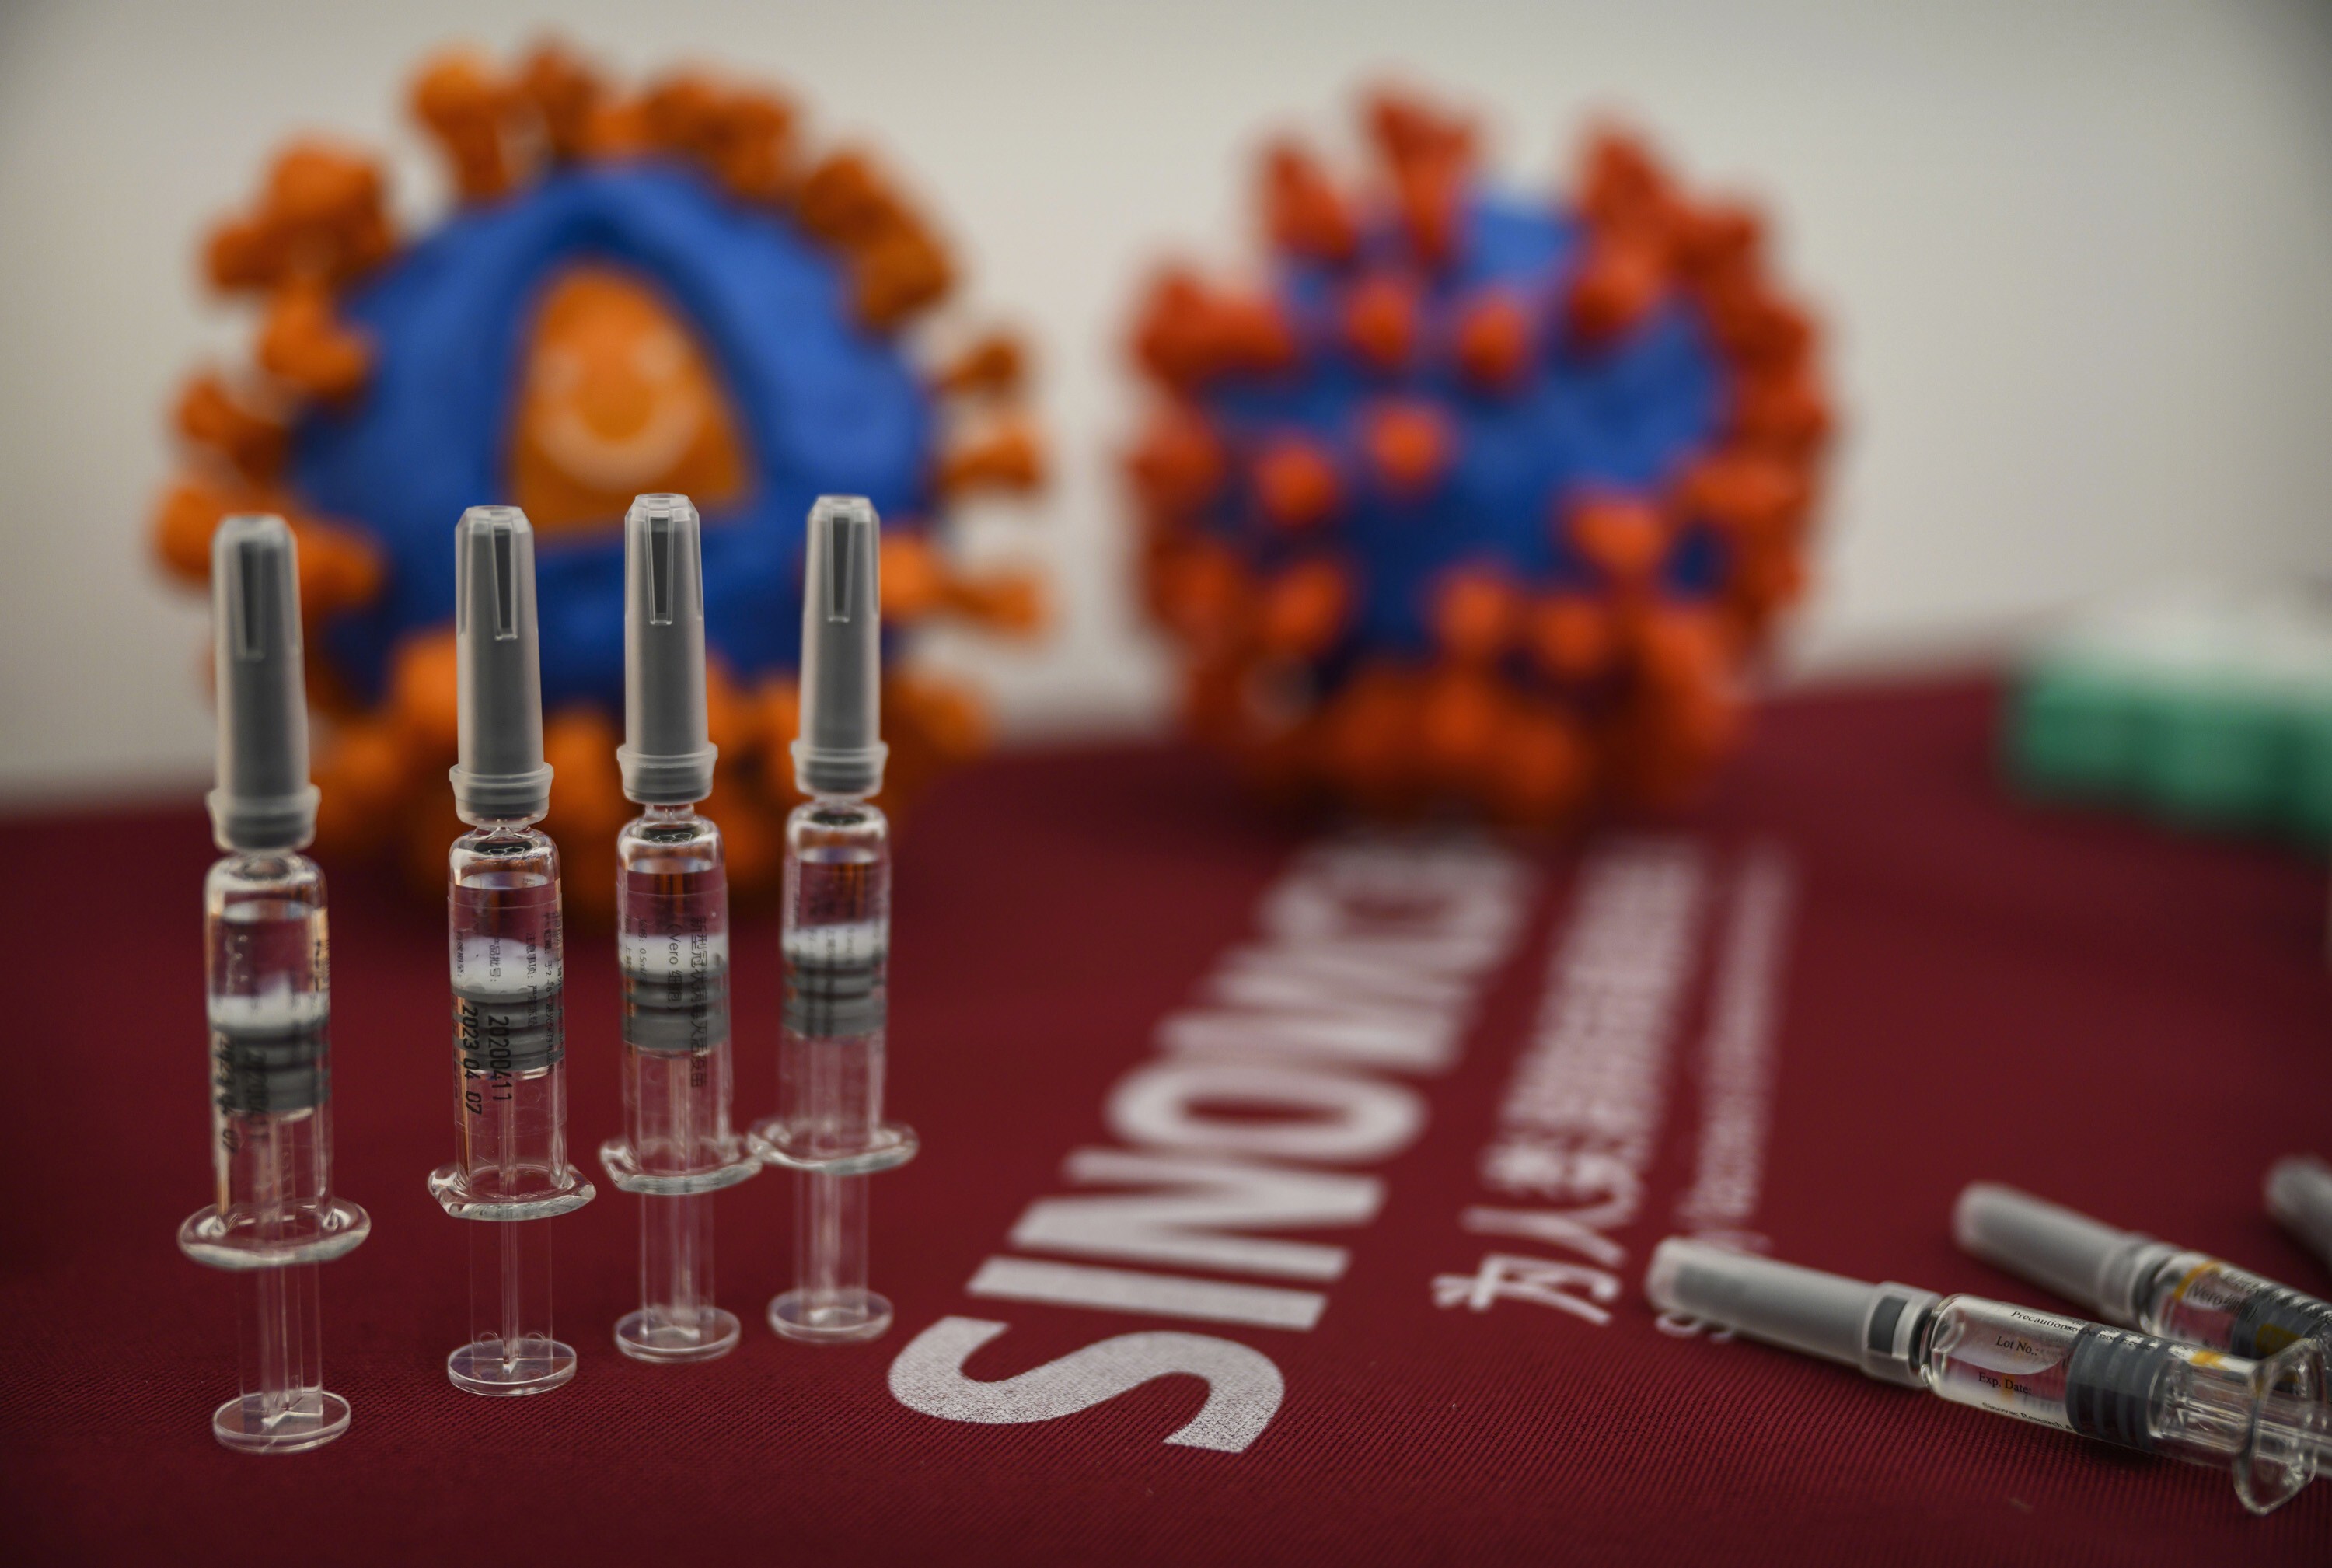 Brazilian authorities have revealed testing resulted in a 78 per cent effectiveness rate for Sinovac Biotech’s vaccine. Photo: Kevin Frayer/Getty Images